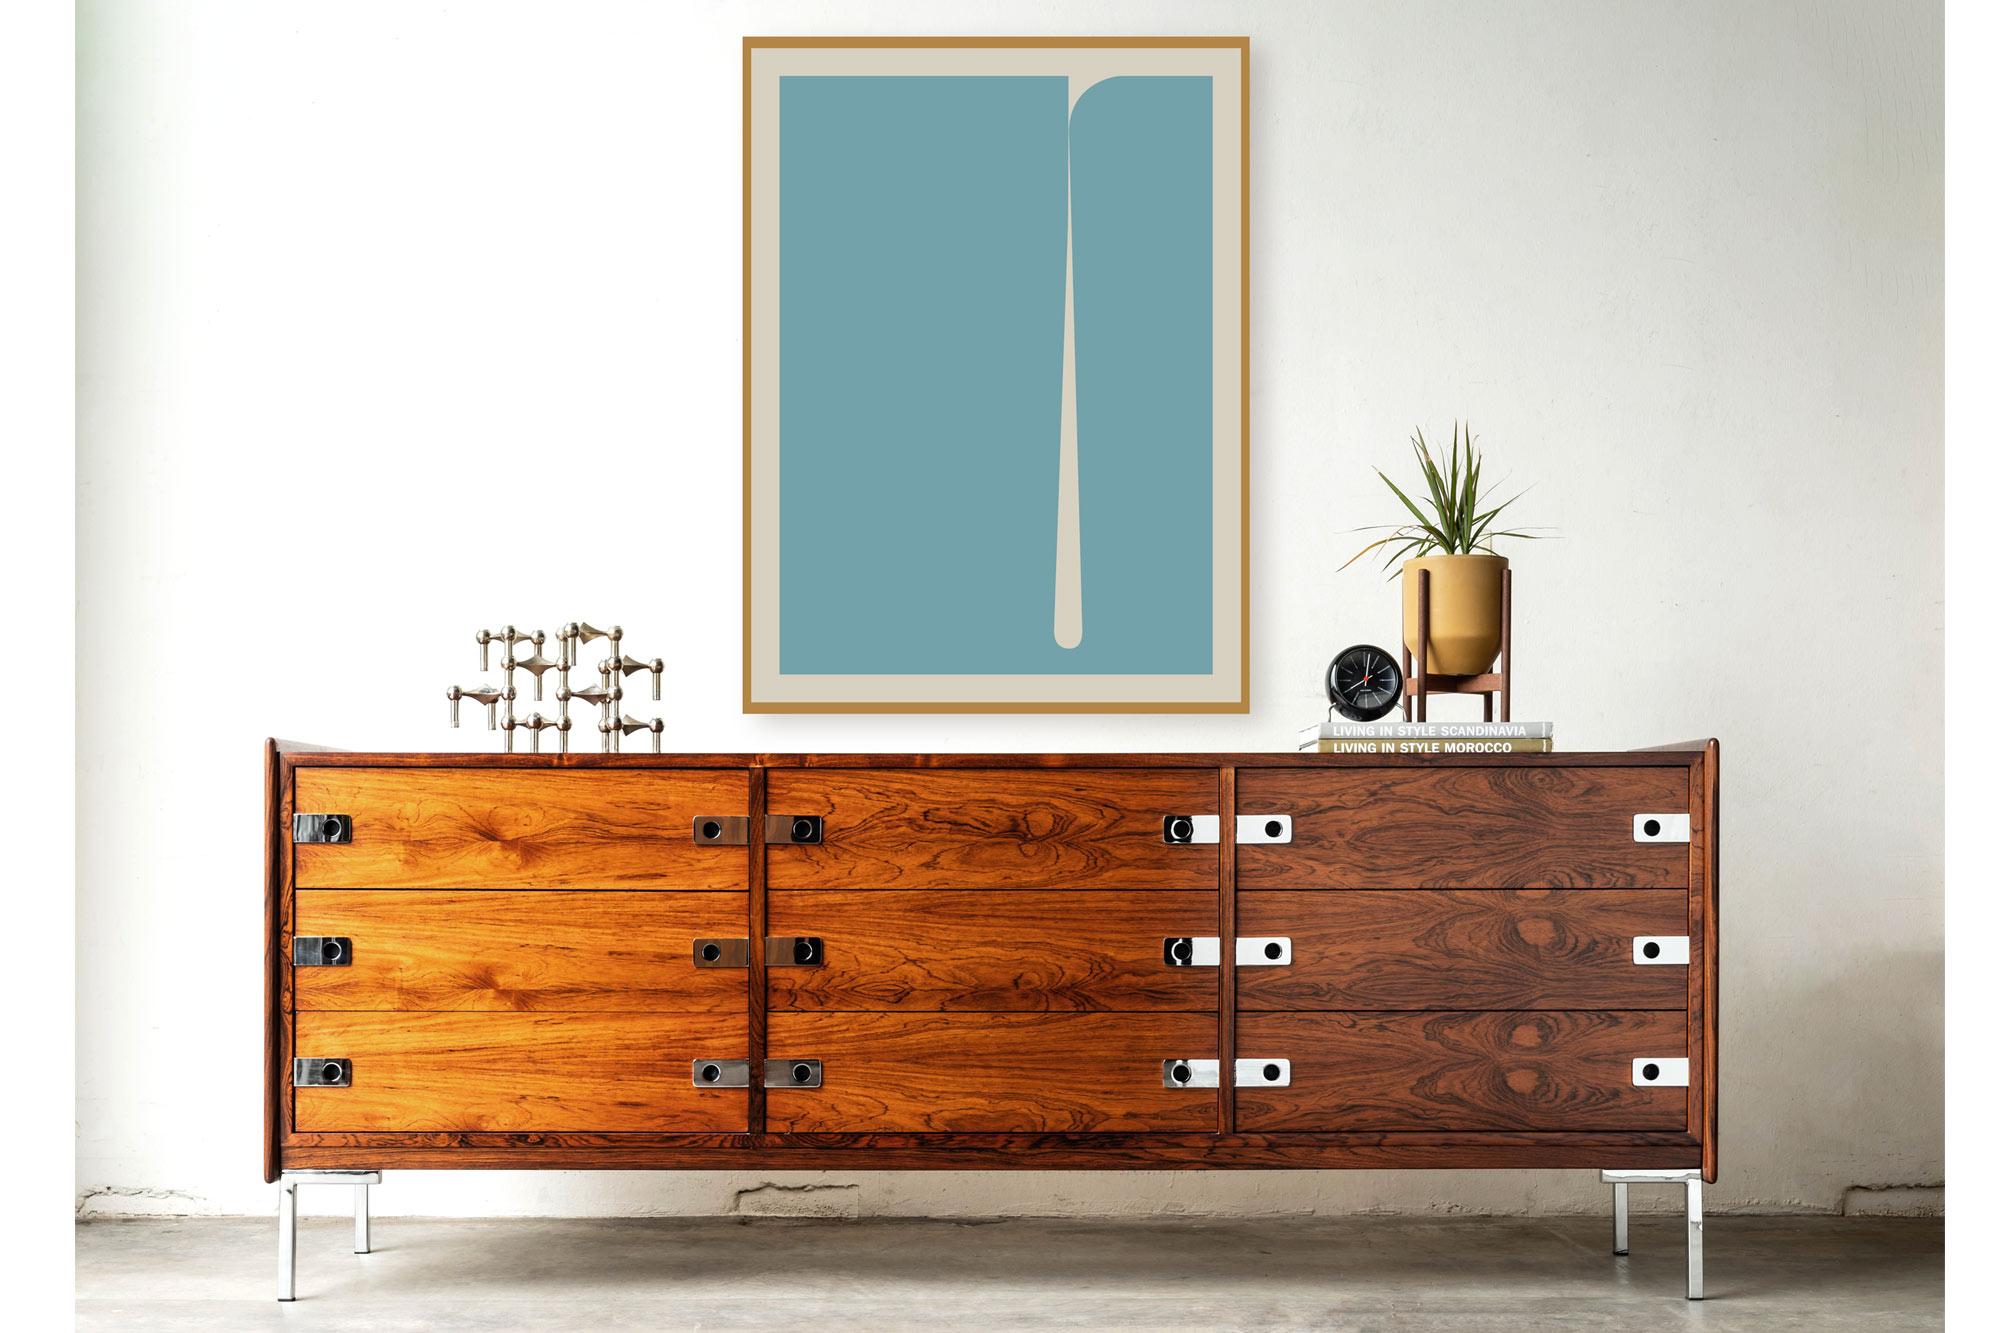 Indulge yourself in the luxurious beauty of this rosewood and chrome triple dresser, crafted in the manner of the renowned designer Arne Vodder. With its stunningly grained rosewood exterior and polished chrome accents, this piece is truly a